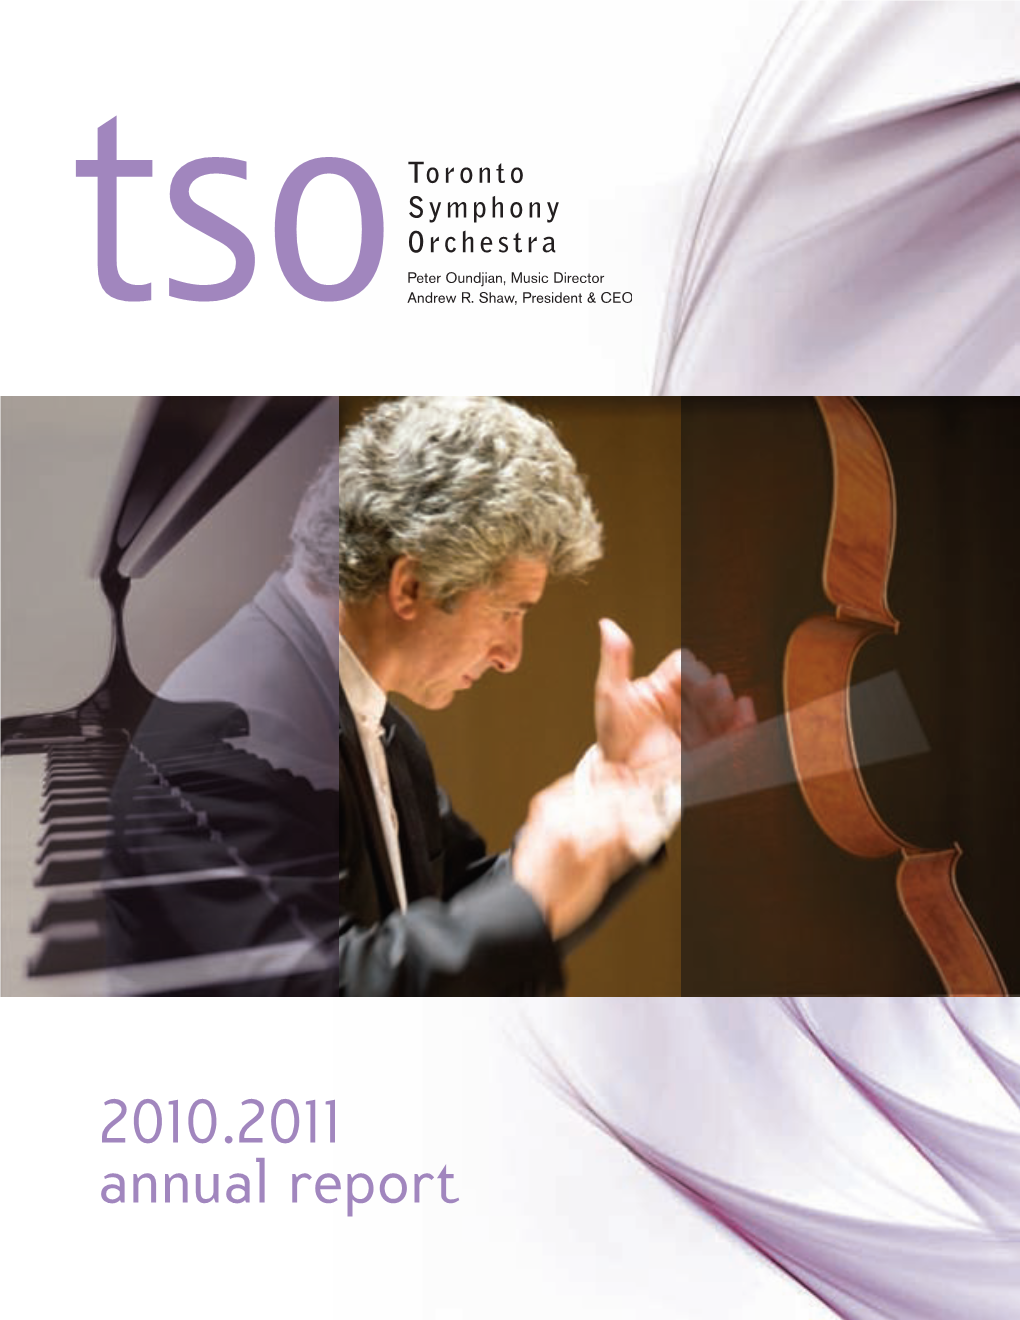 2010.2011 Annual Report from Our Music Director